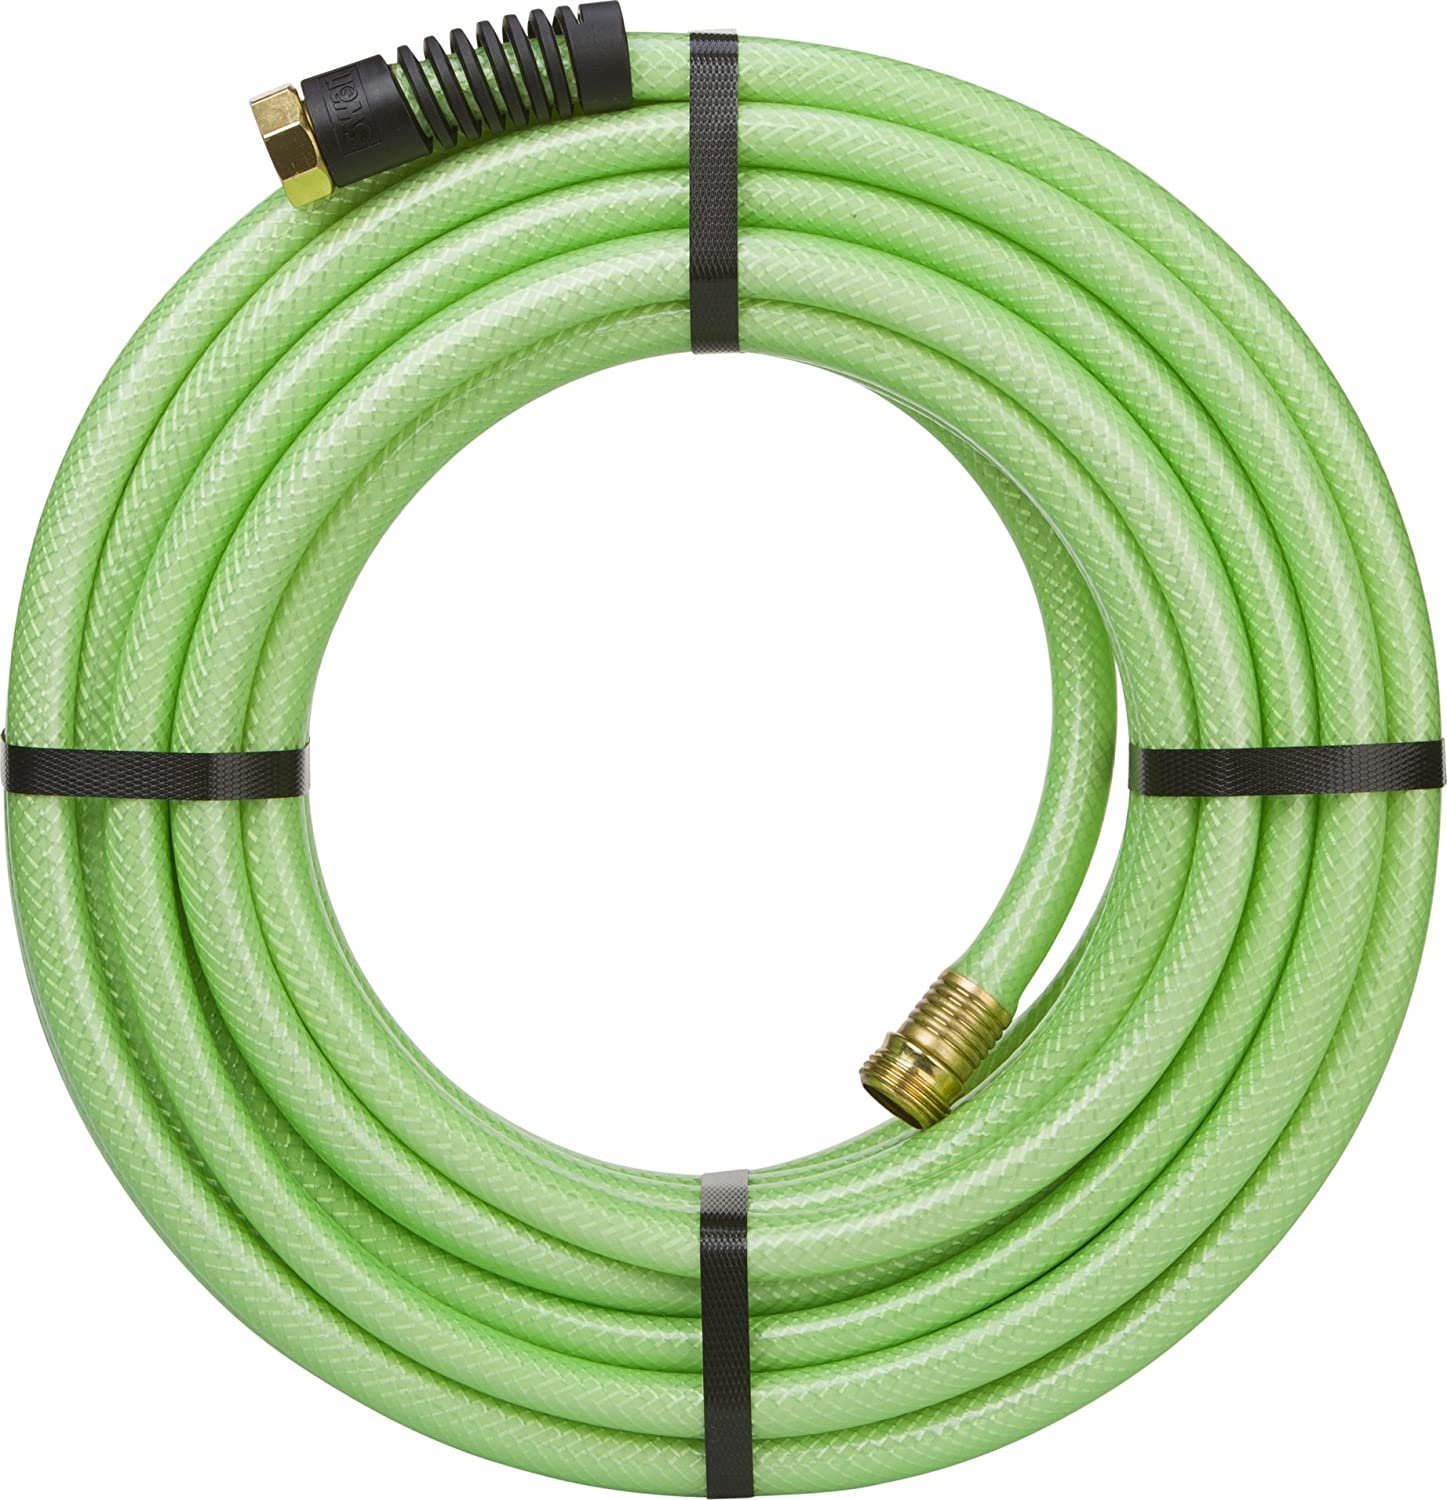 Swan Products ELGG58050 Element Green & Grow Lead Free Gardening Hose 50' x 5/8", Green - image 2 of 7